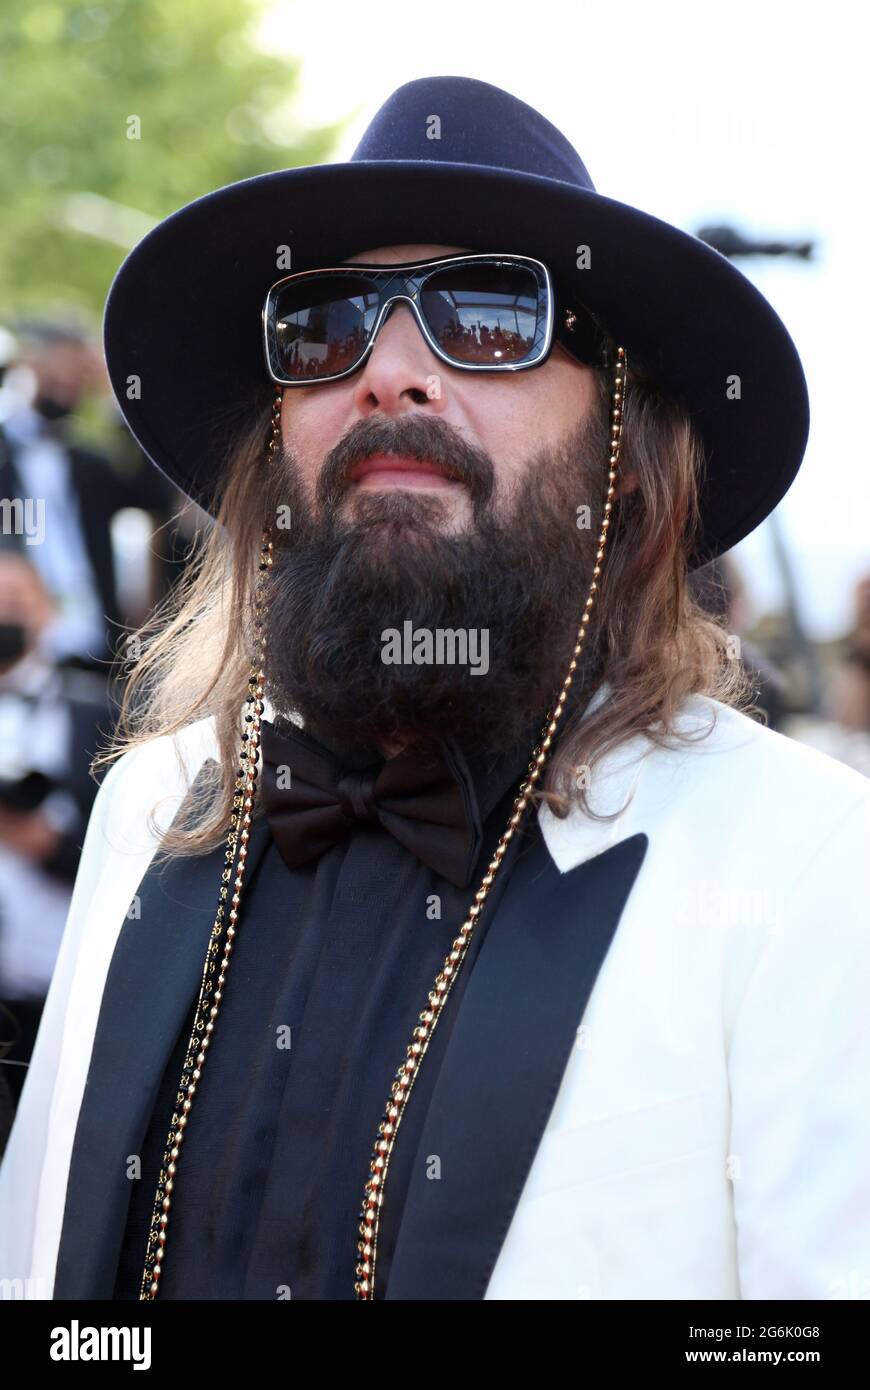 Cannes, France. 06th July, 2021. Sebastien Tellier arrives on the red carpet before the screening of the film 'Annette' at the opening of the 74th annual Cannes International Film Festival in Cannes, France on Tuesday, July 6, 2021. Photo by David Silpa/UPI Credit: UPI/Alamy Live News Stock Photo